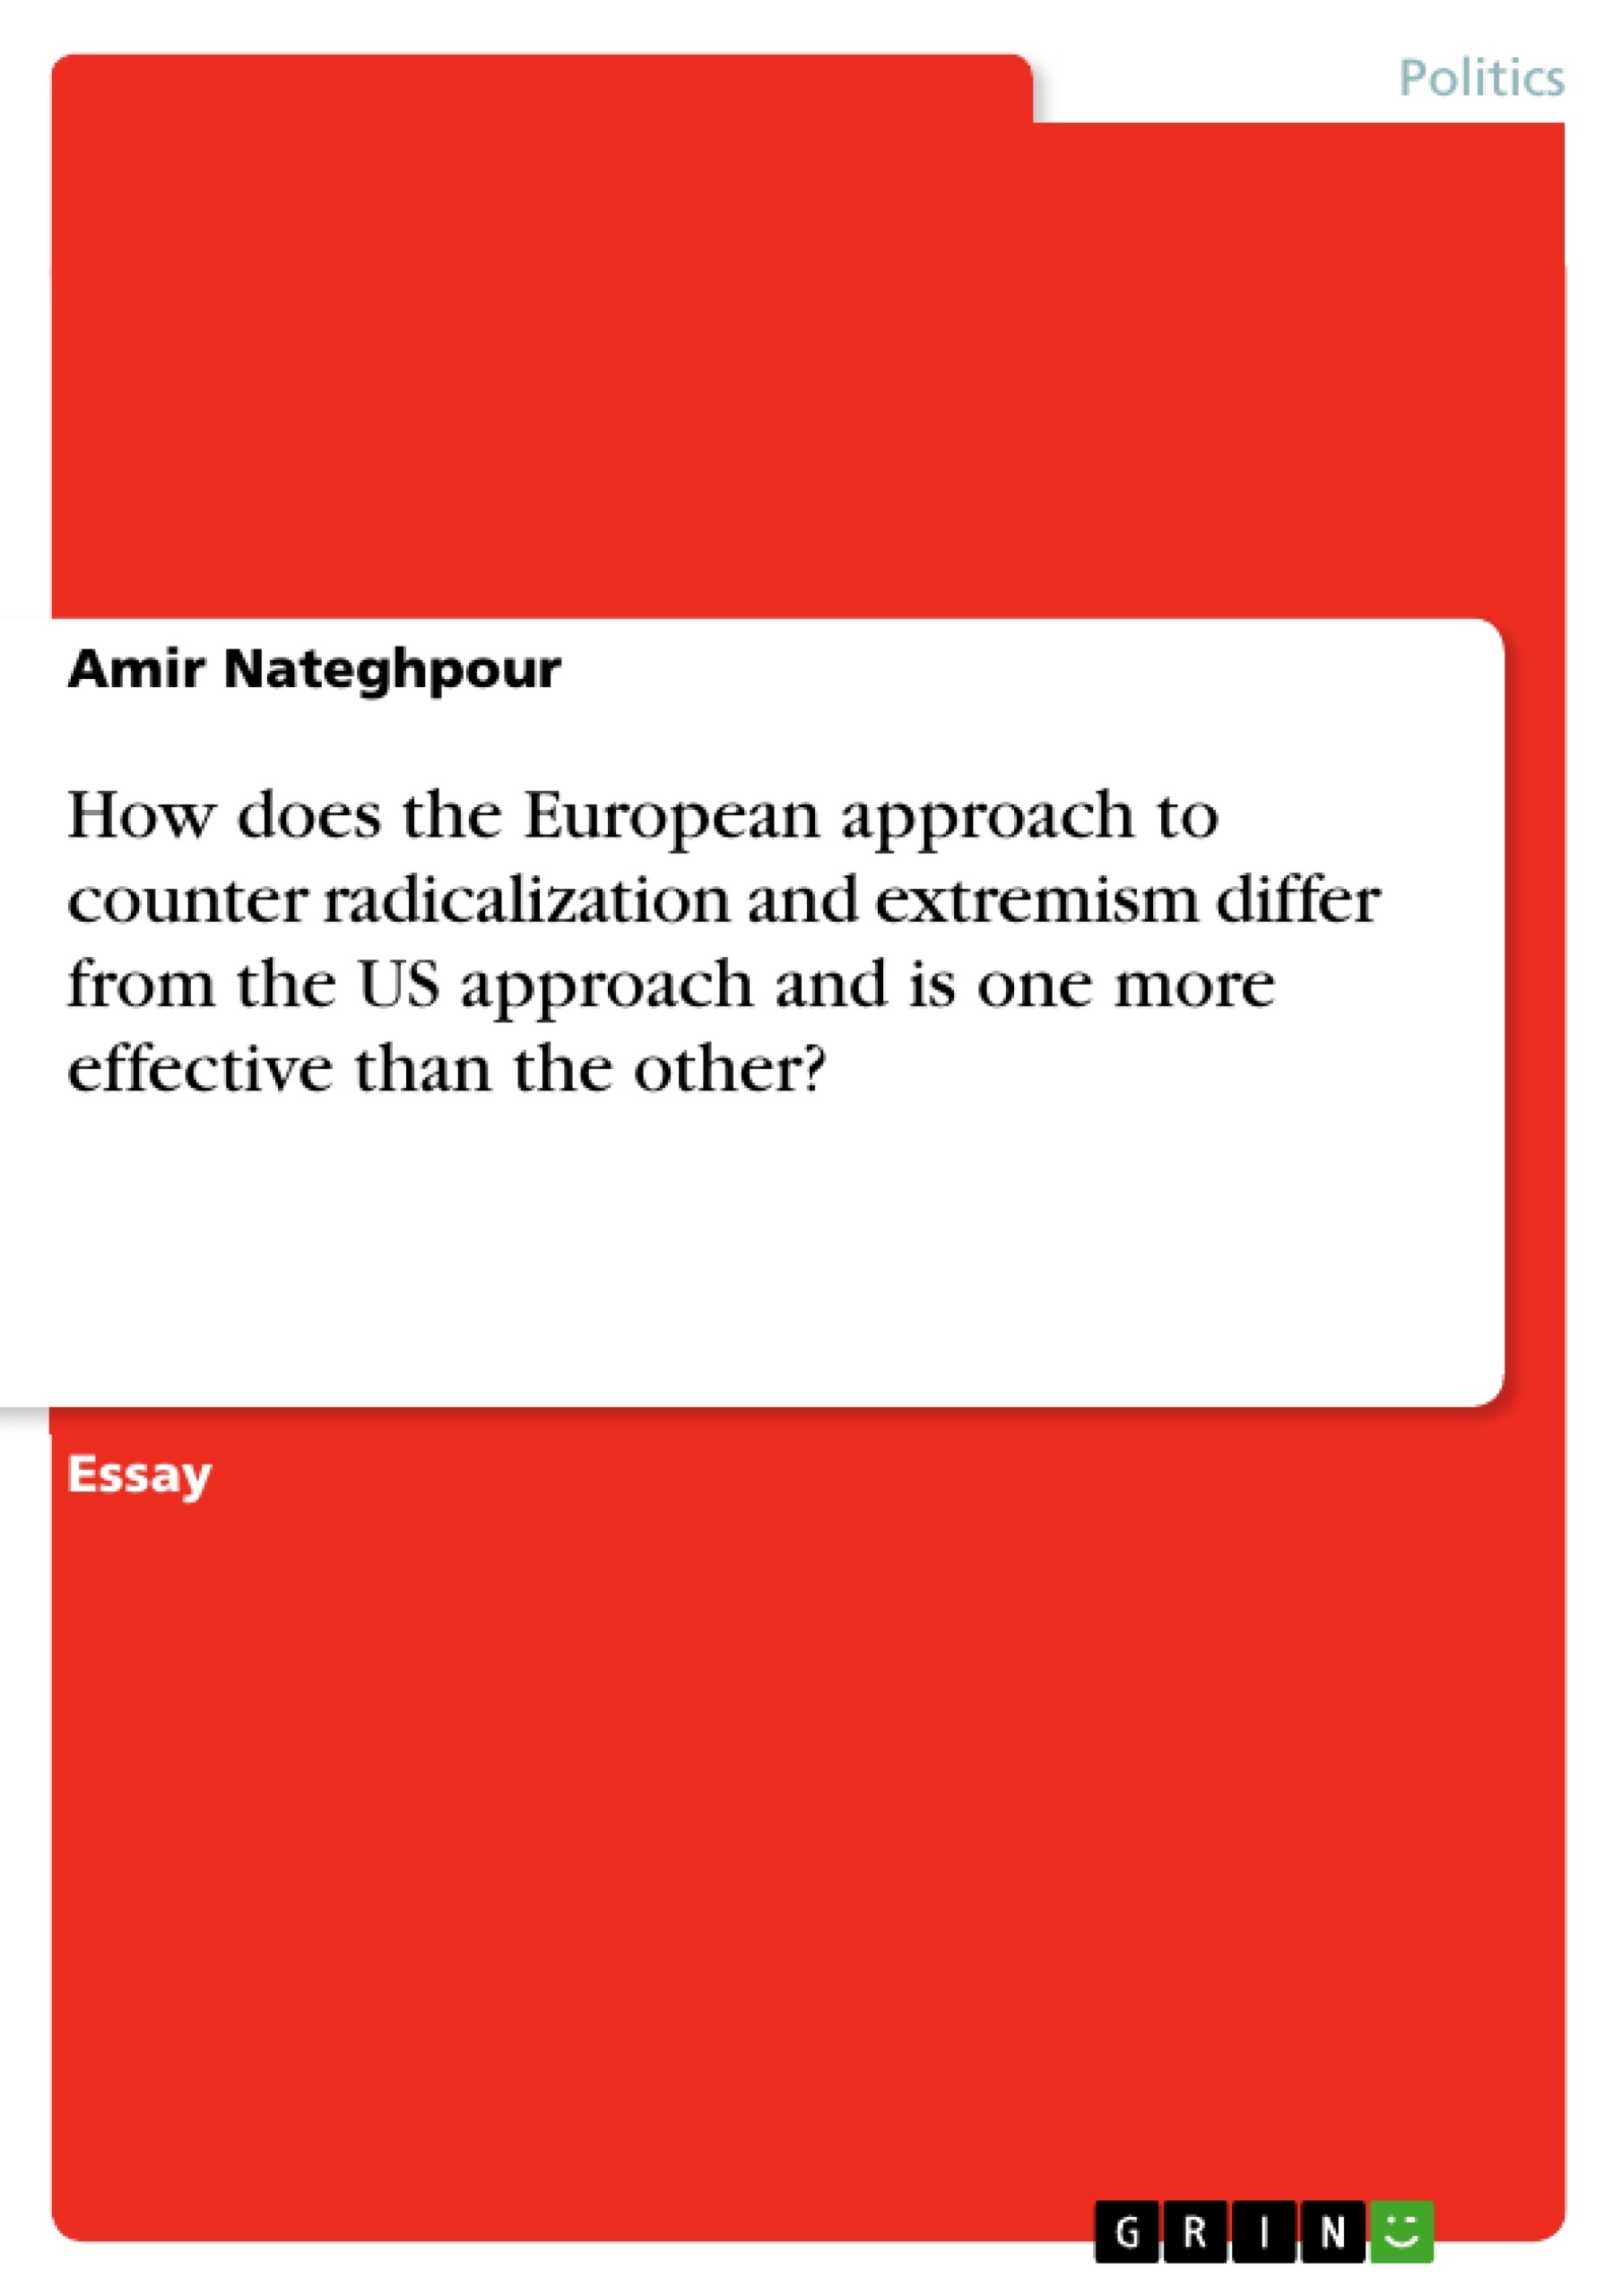 Title: How does the European approach to counter radicalization and extremism differ from the US approach and is one more effective than the other?